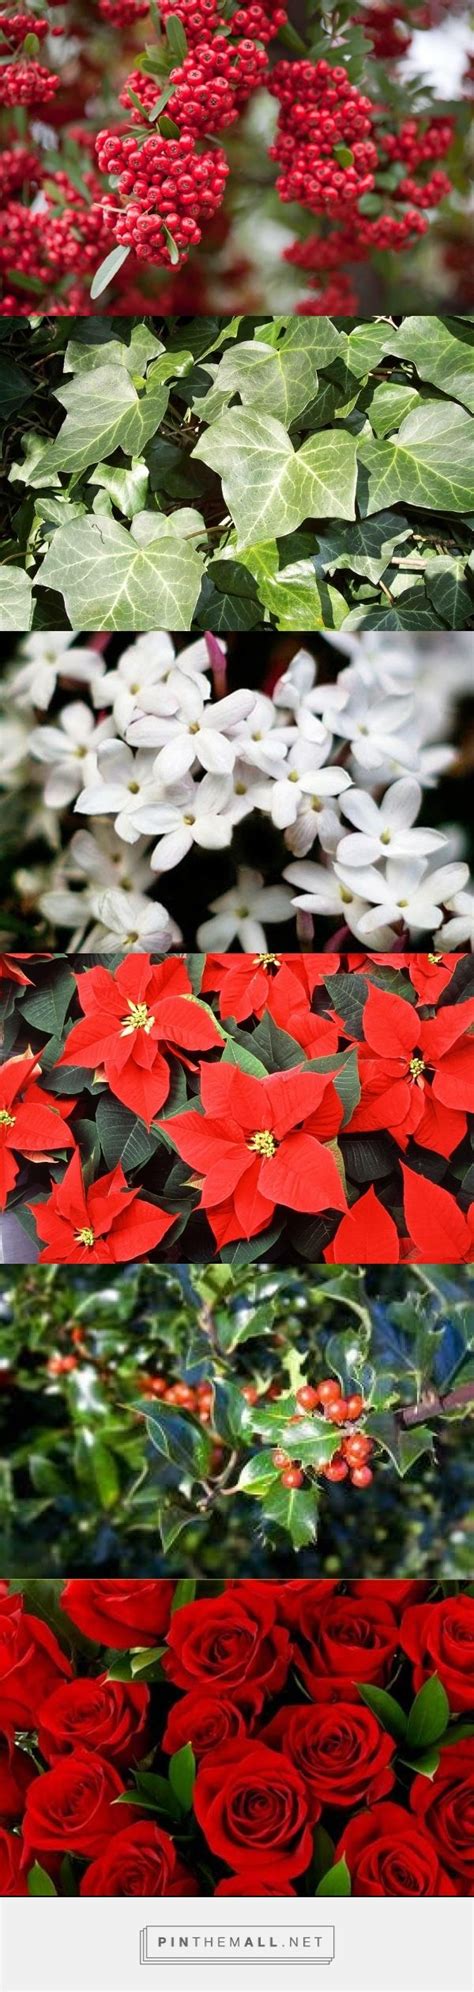 My Favourite Winter Flowers And Plants A Grouped Images Picture